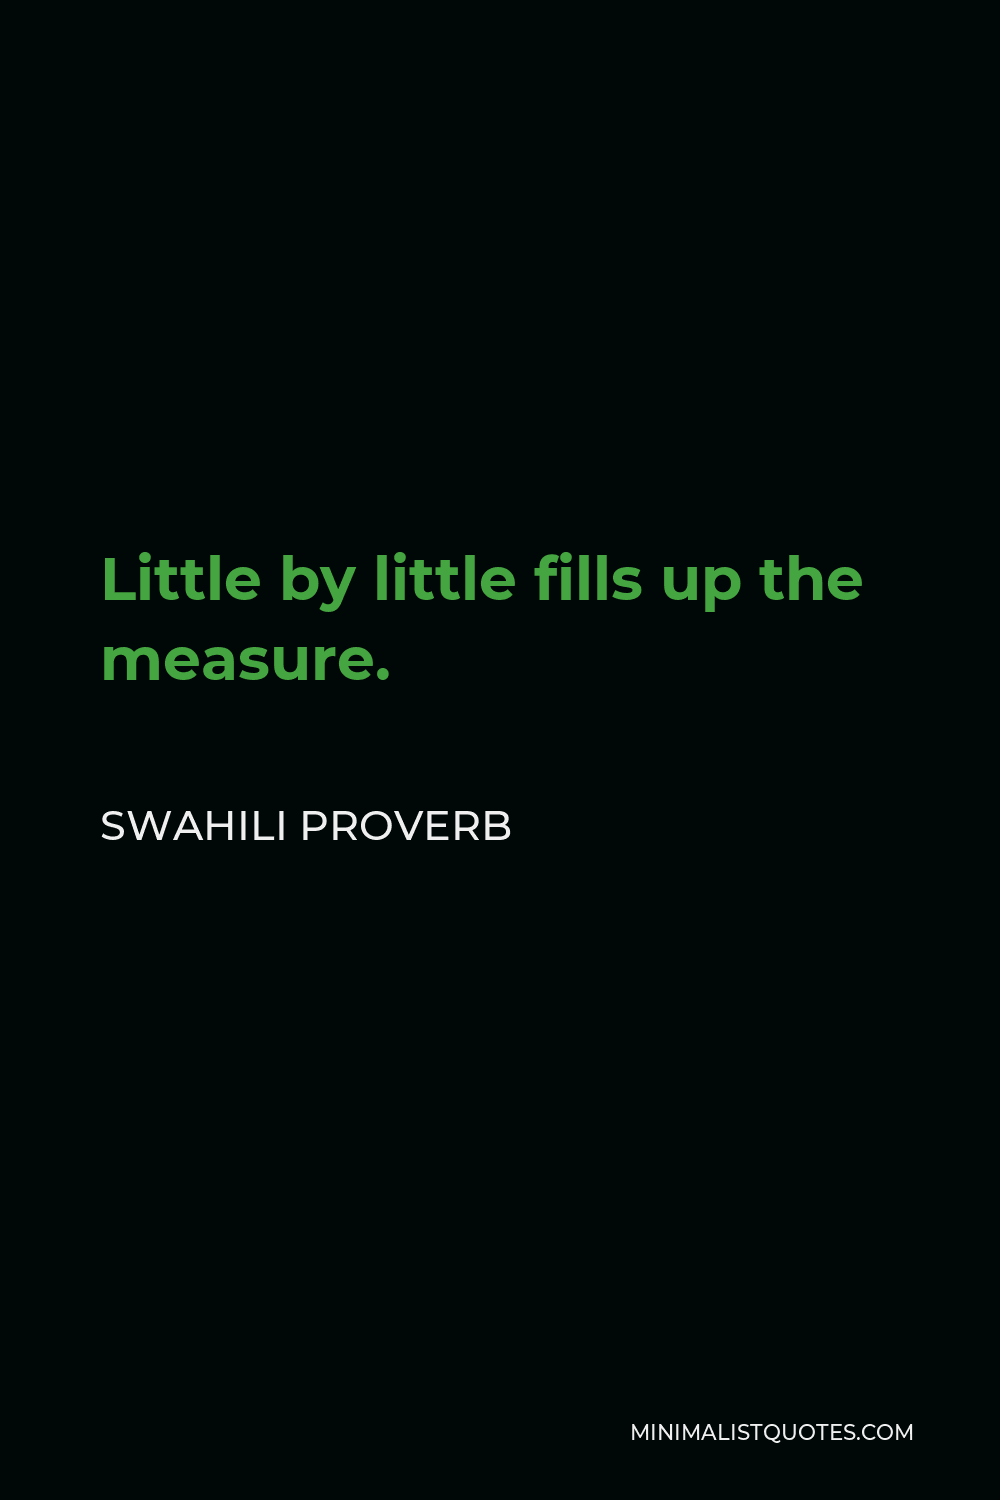 Swahili Proverb Quote - Little by little fills up the measure.